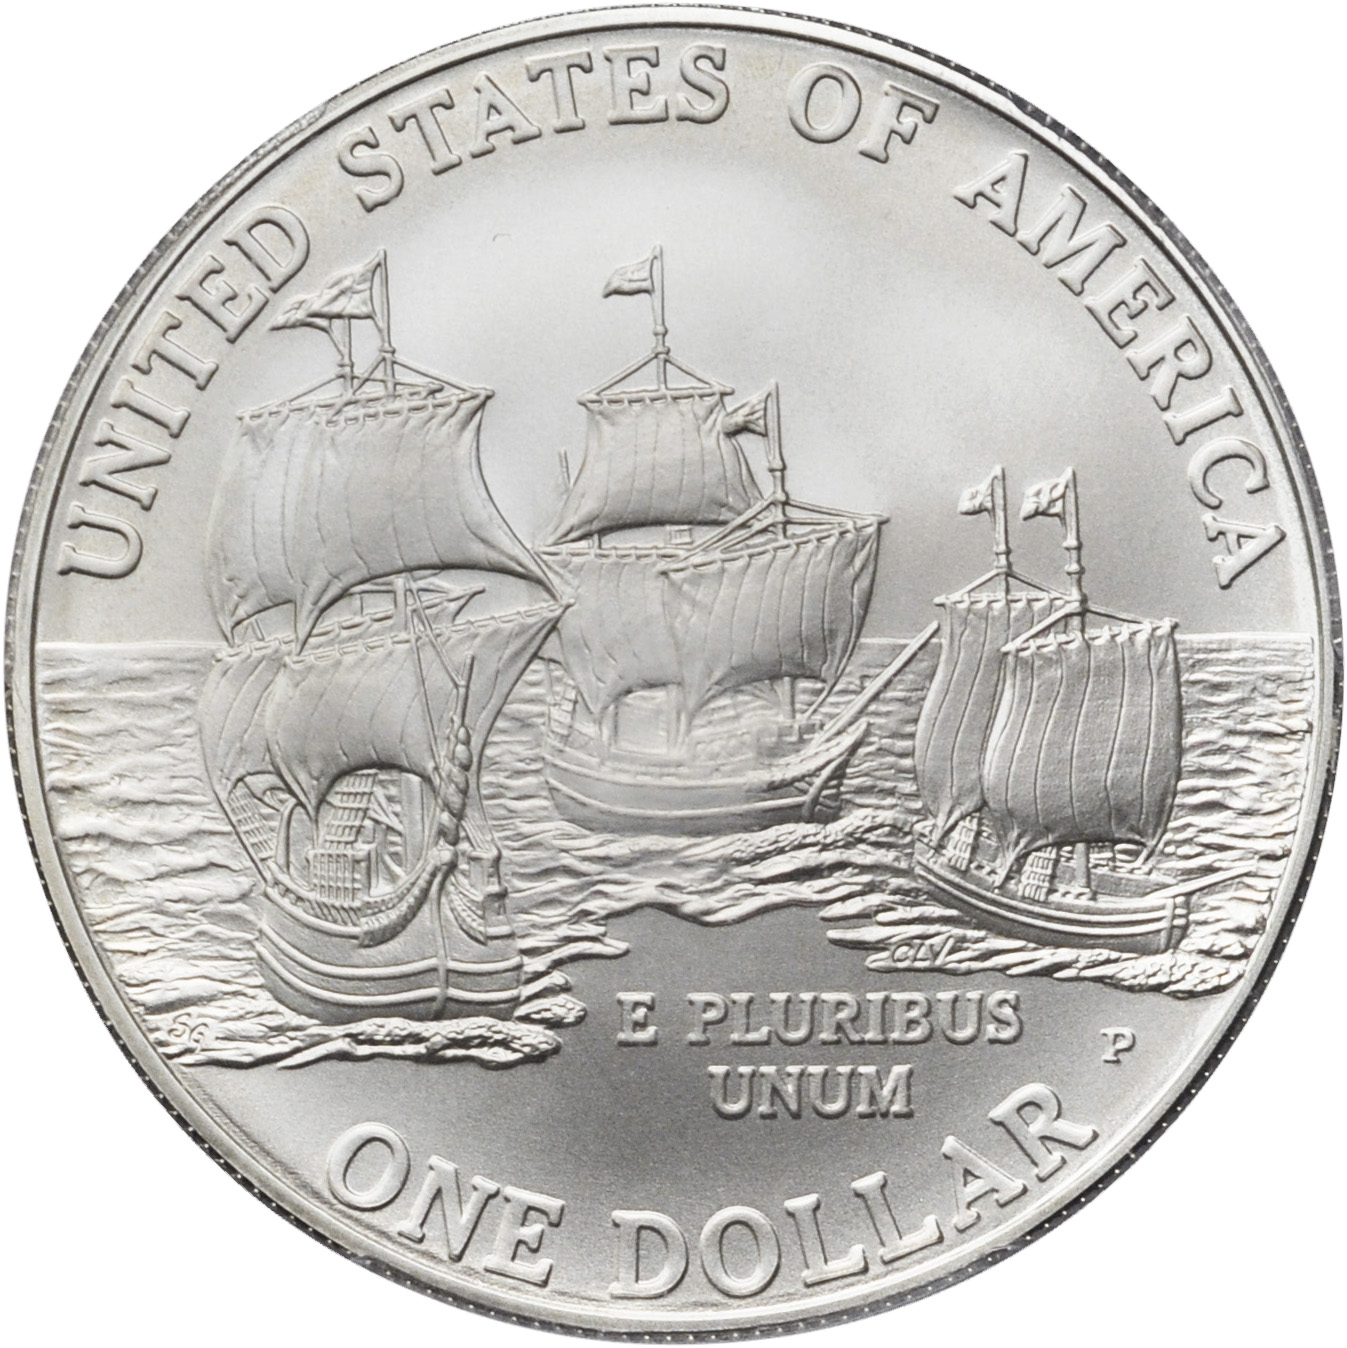 Value of 2007 $1 Jamestown Silver Coin | Sell Silver Coins